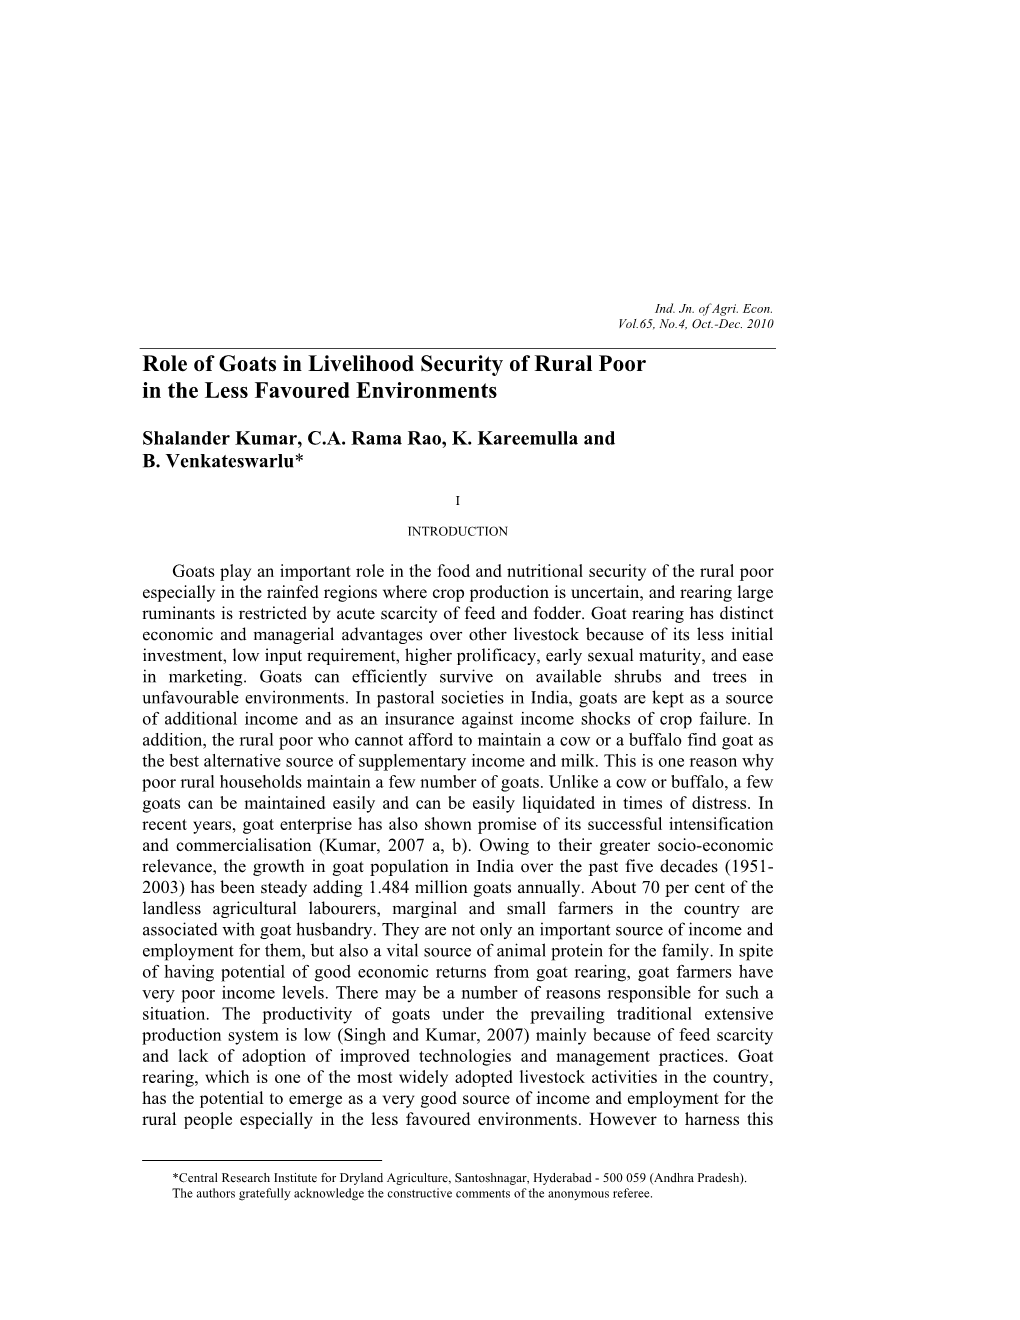 Role of Goats in Livelihood Security of Rural Poor in the Less Favoured Environments